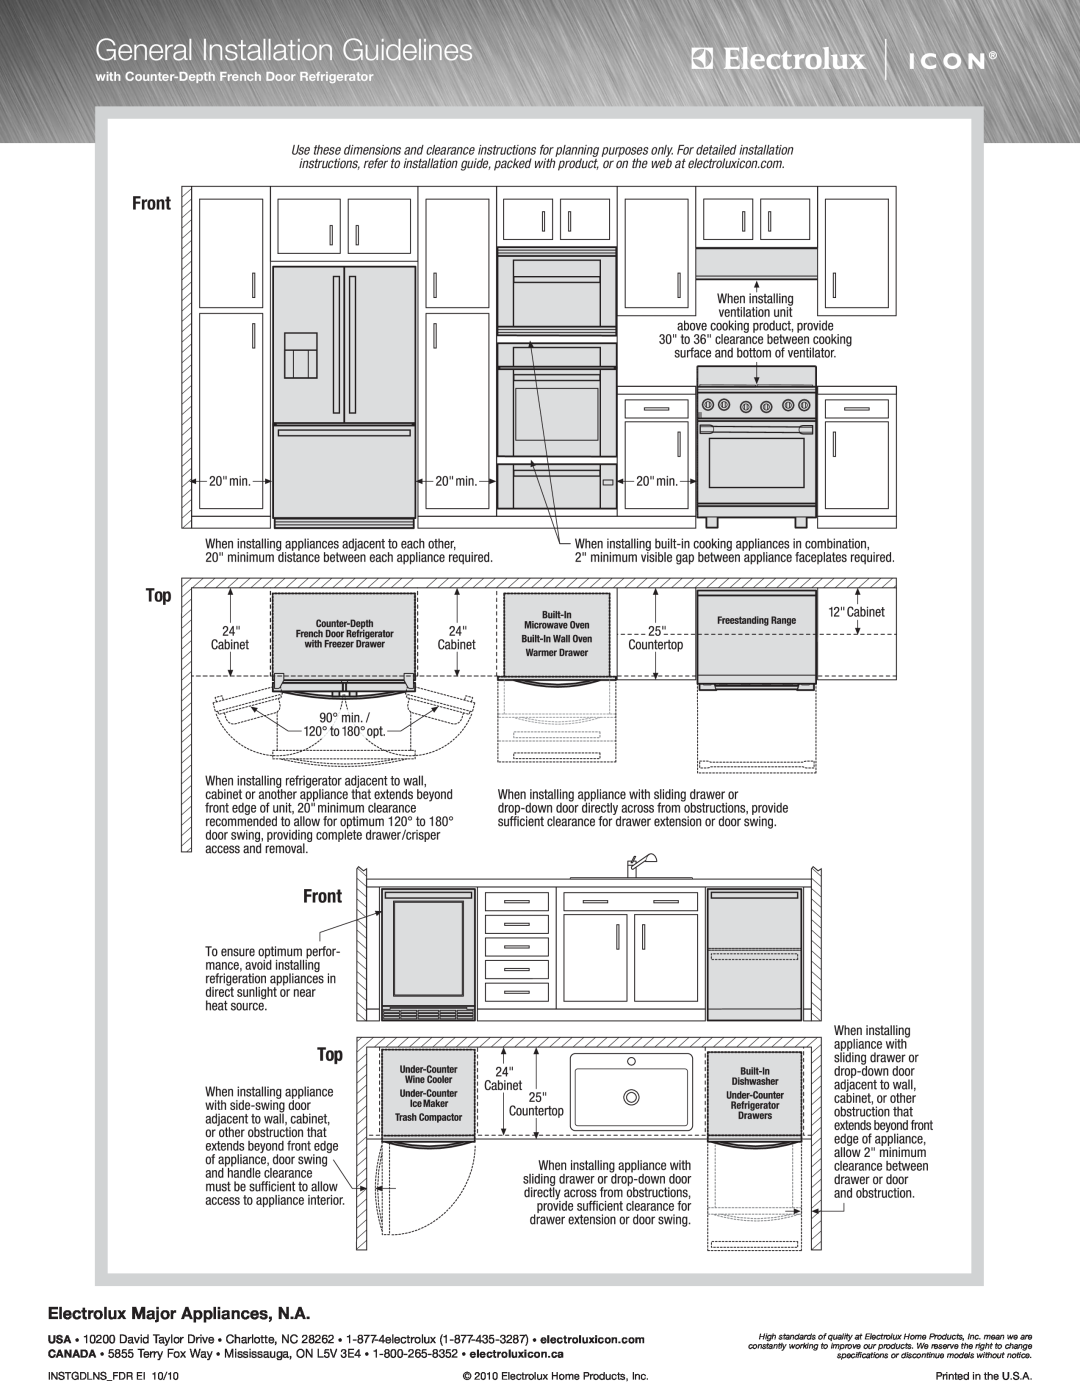 Electrolux E23BC78IPS specifications General Installation Guidelines, Electrolux Major Appliances, N.A, Front 